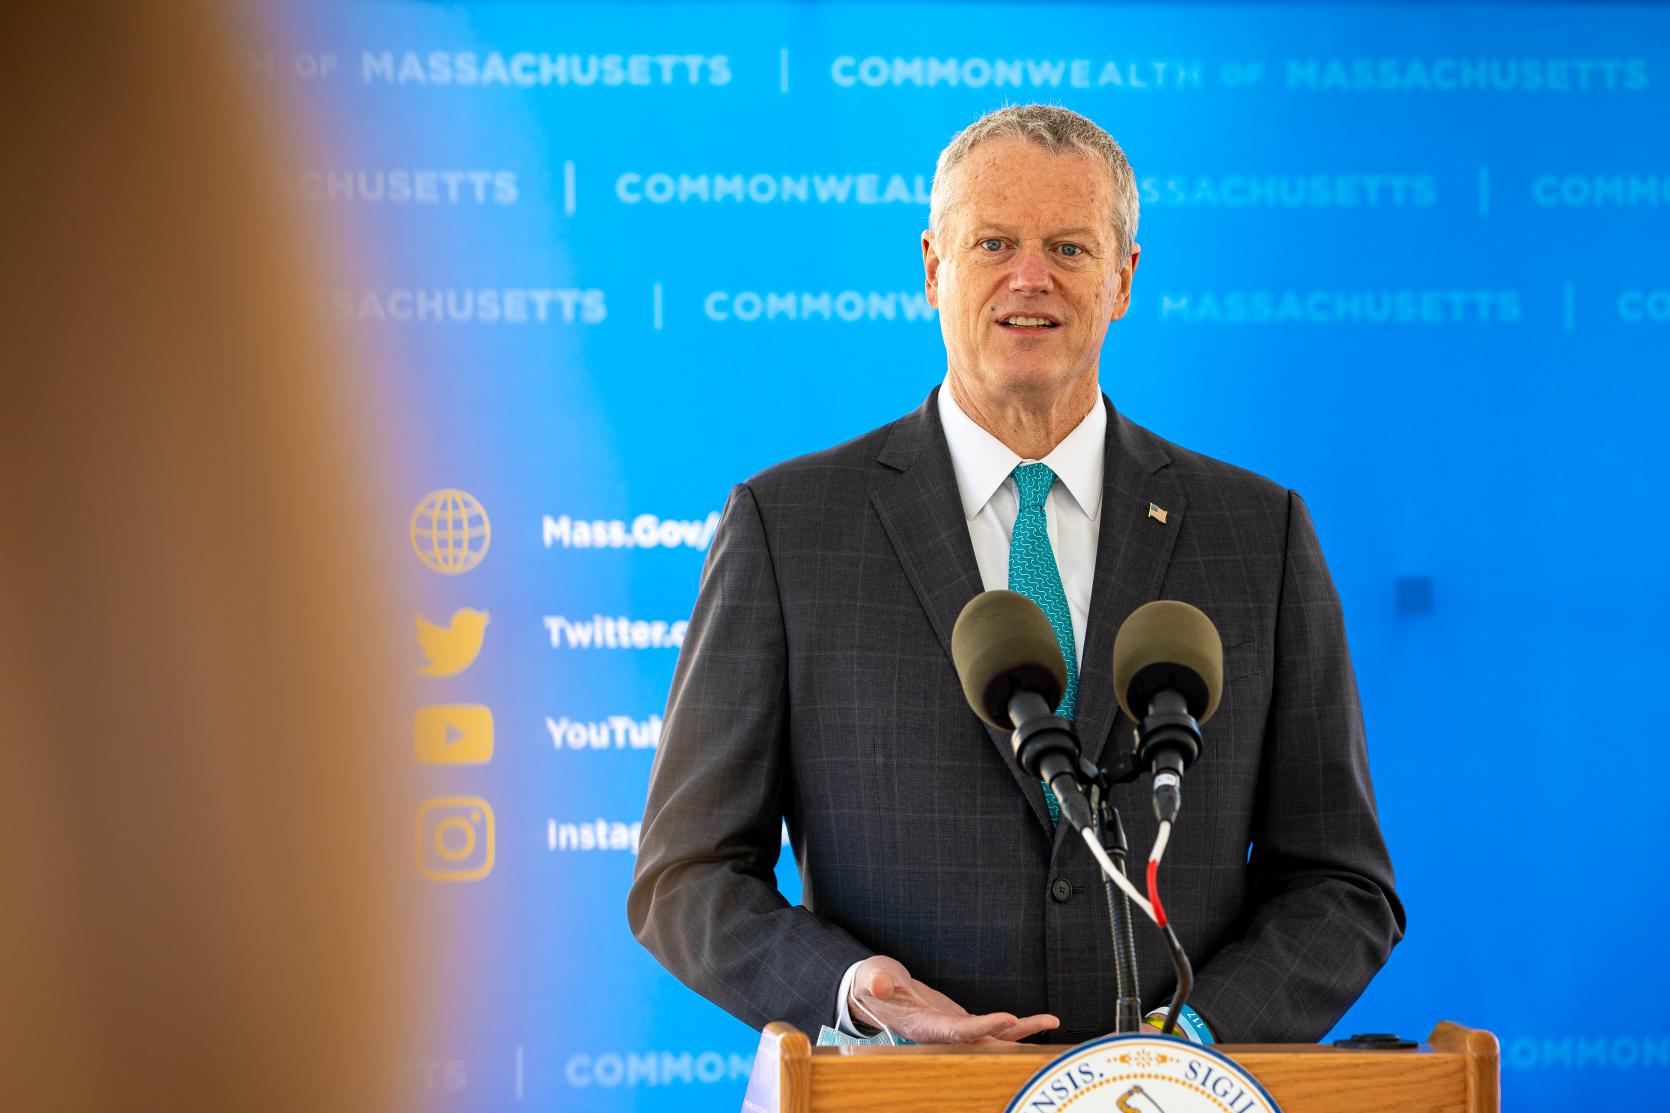 Baker-Polito Administration Announces Employer Vaccination Program, Extension of Targeted free COVID-19 Testing Sites, Provides Weekly Dose Updates